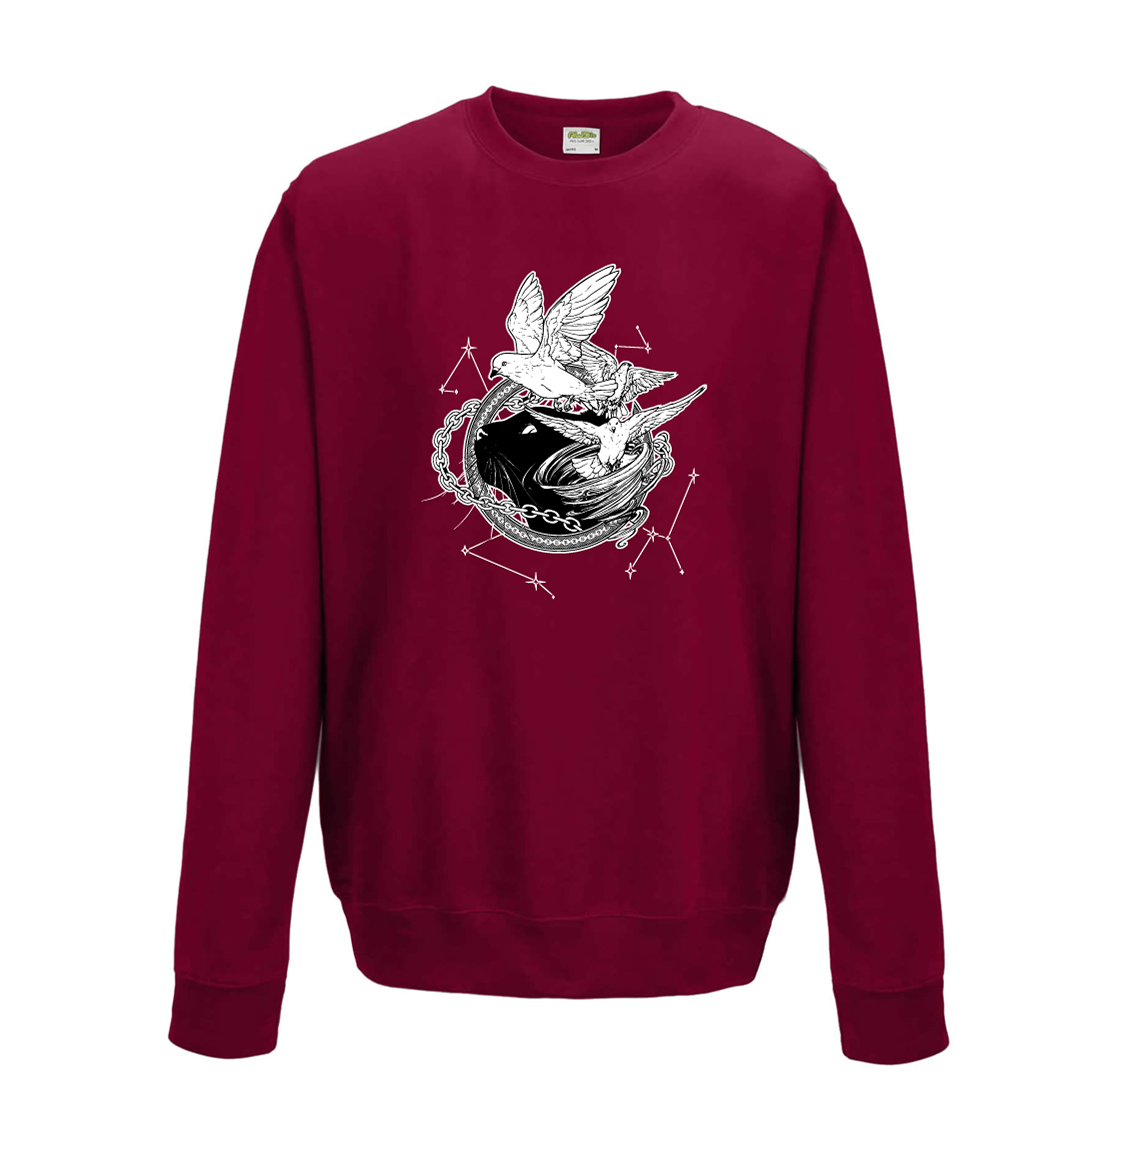 Red sweatshirt with white illustration of Dustspinners, constellations, and chains swirling around Faithful the cat